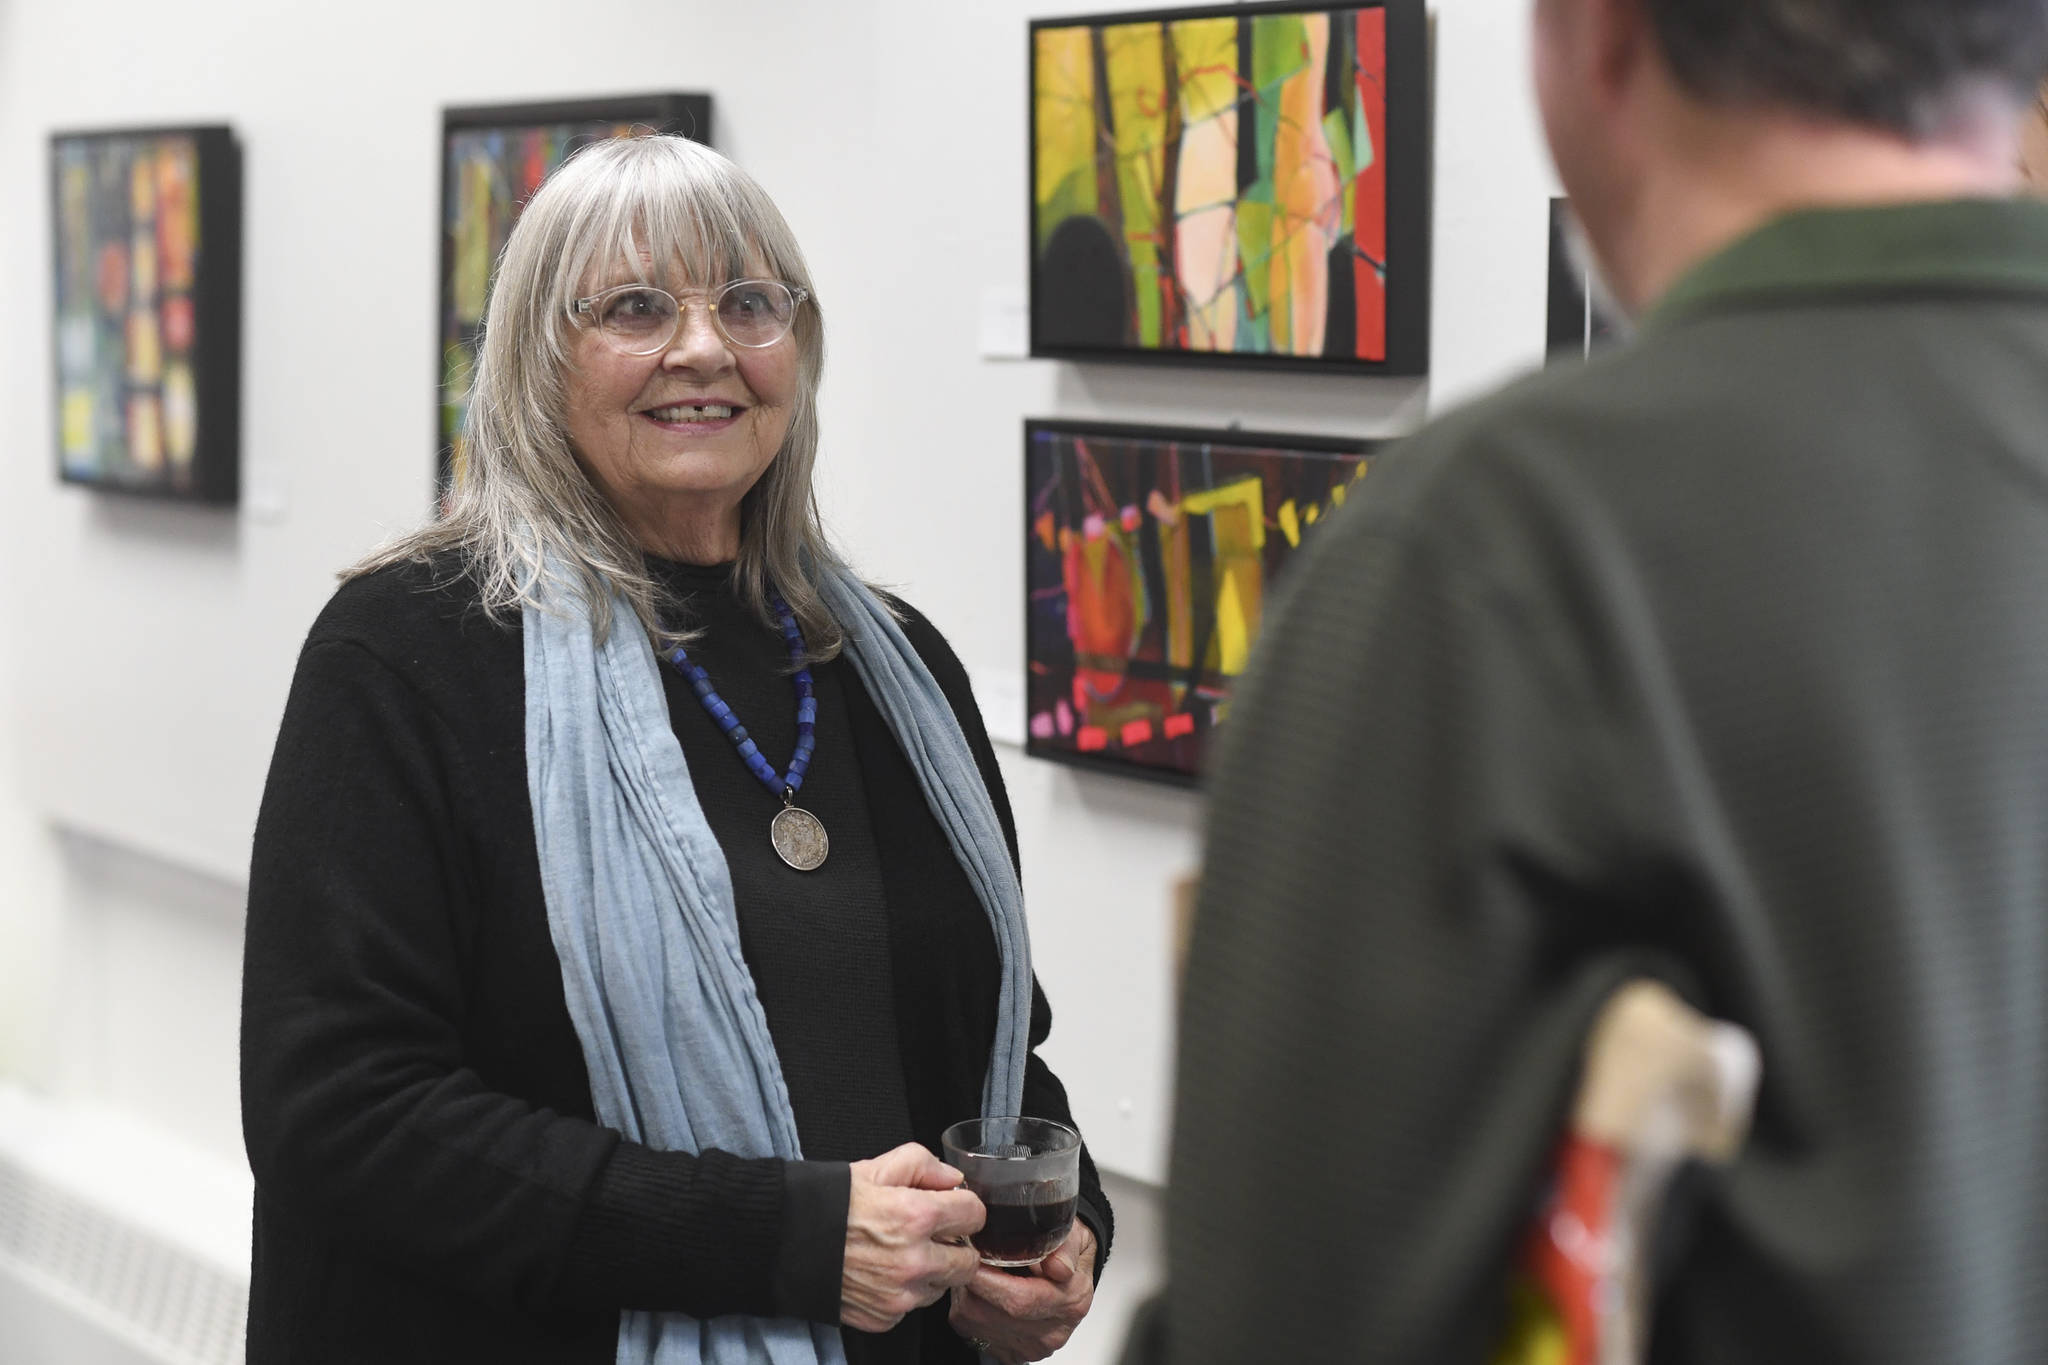 Mary Ida Henrikson talks with viewers of her oil paintings “Beyond the Pale,” on display at the Juneau Arts & Culture Center during First Friday on Oct. 4, 2019. (Michael Penn | Juneau Empire)